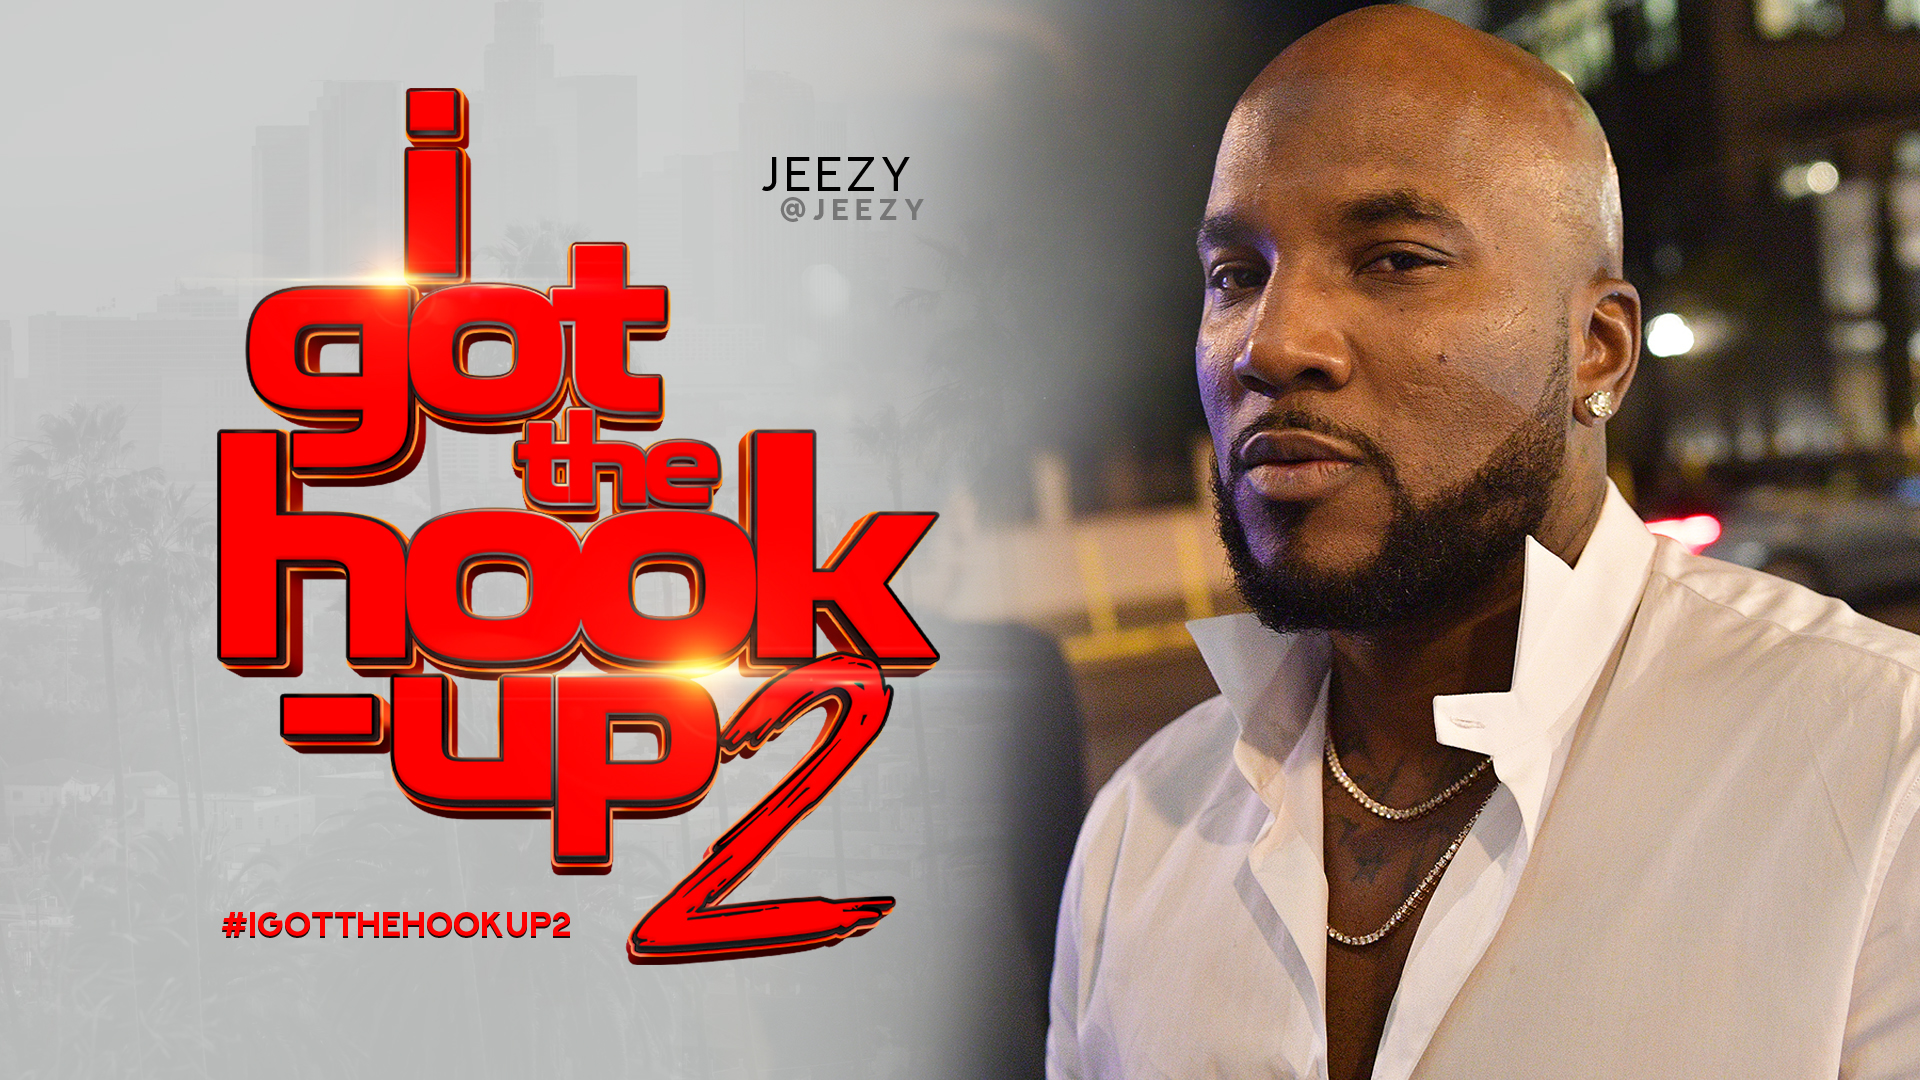 Master p gives jeezy his first acting role in a theatrical movie "I Go...